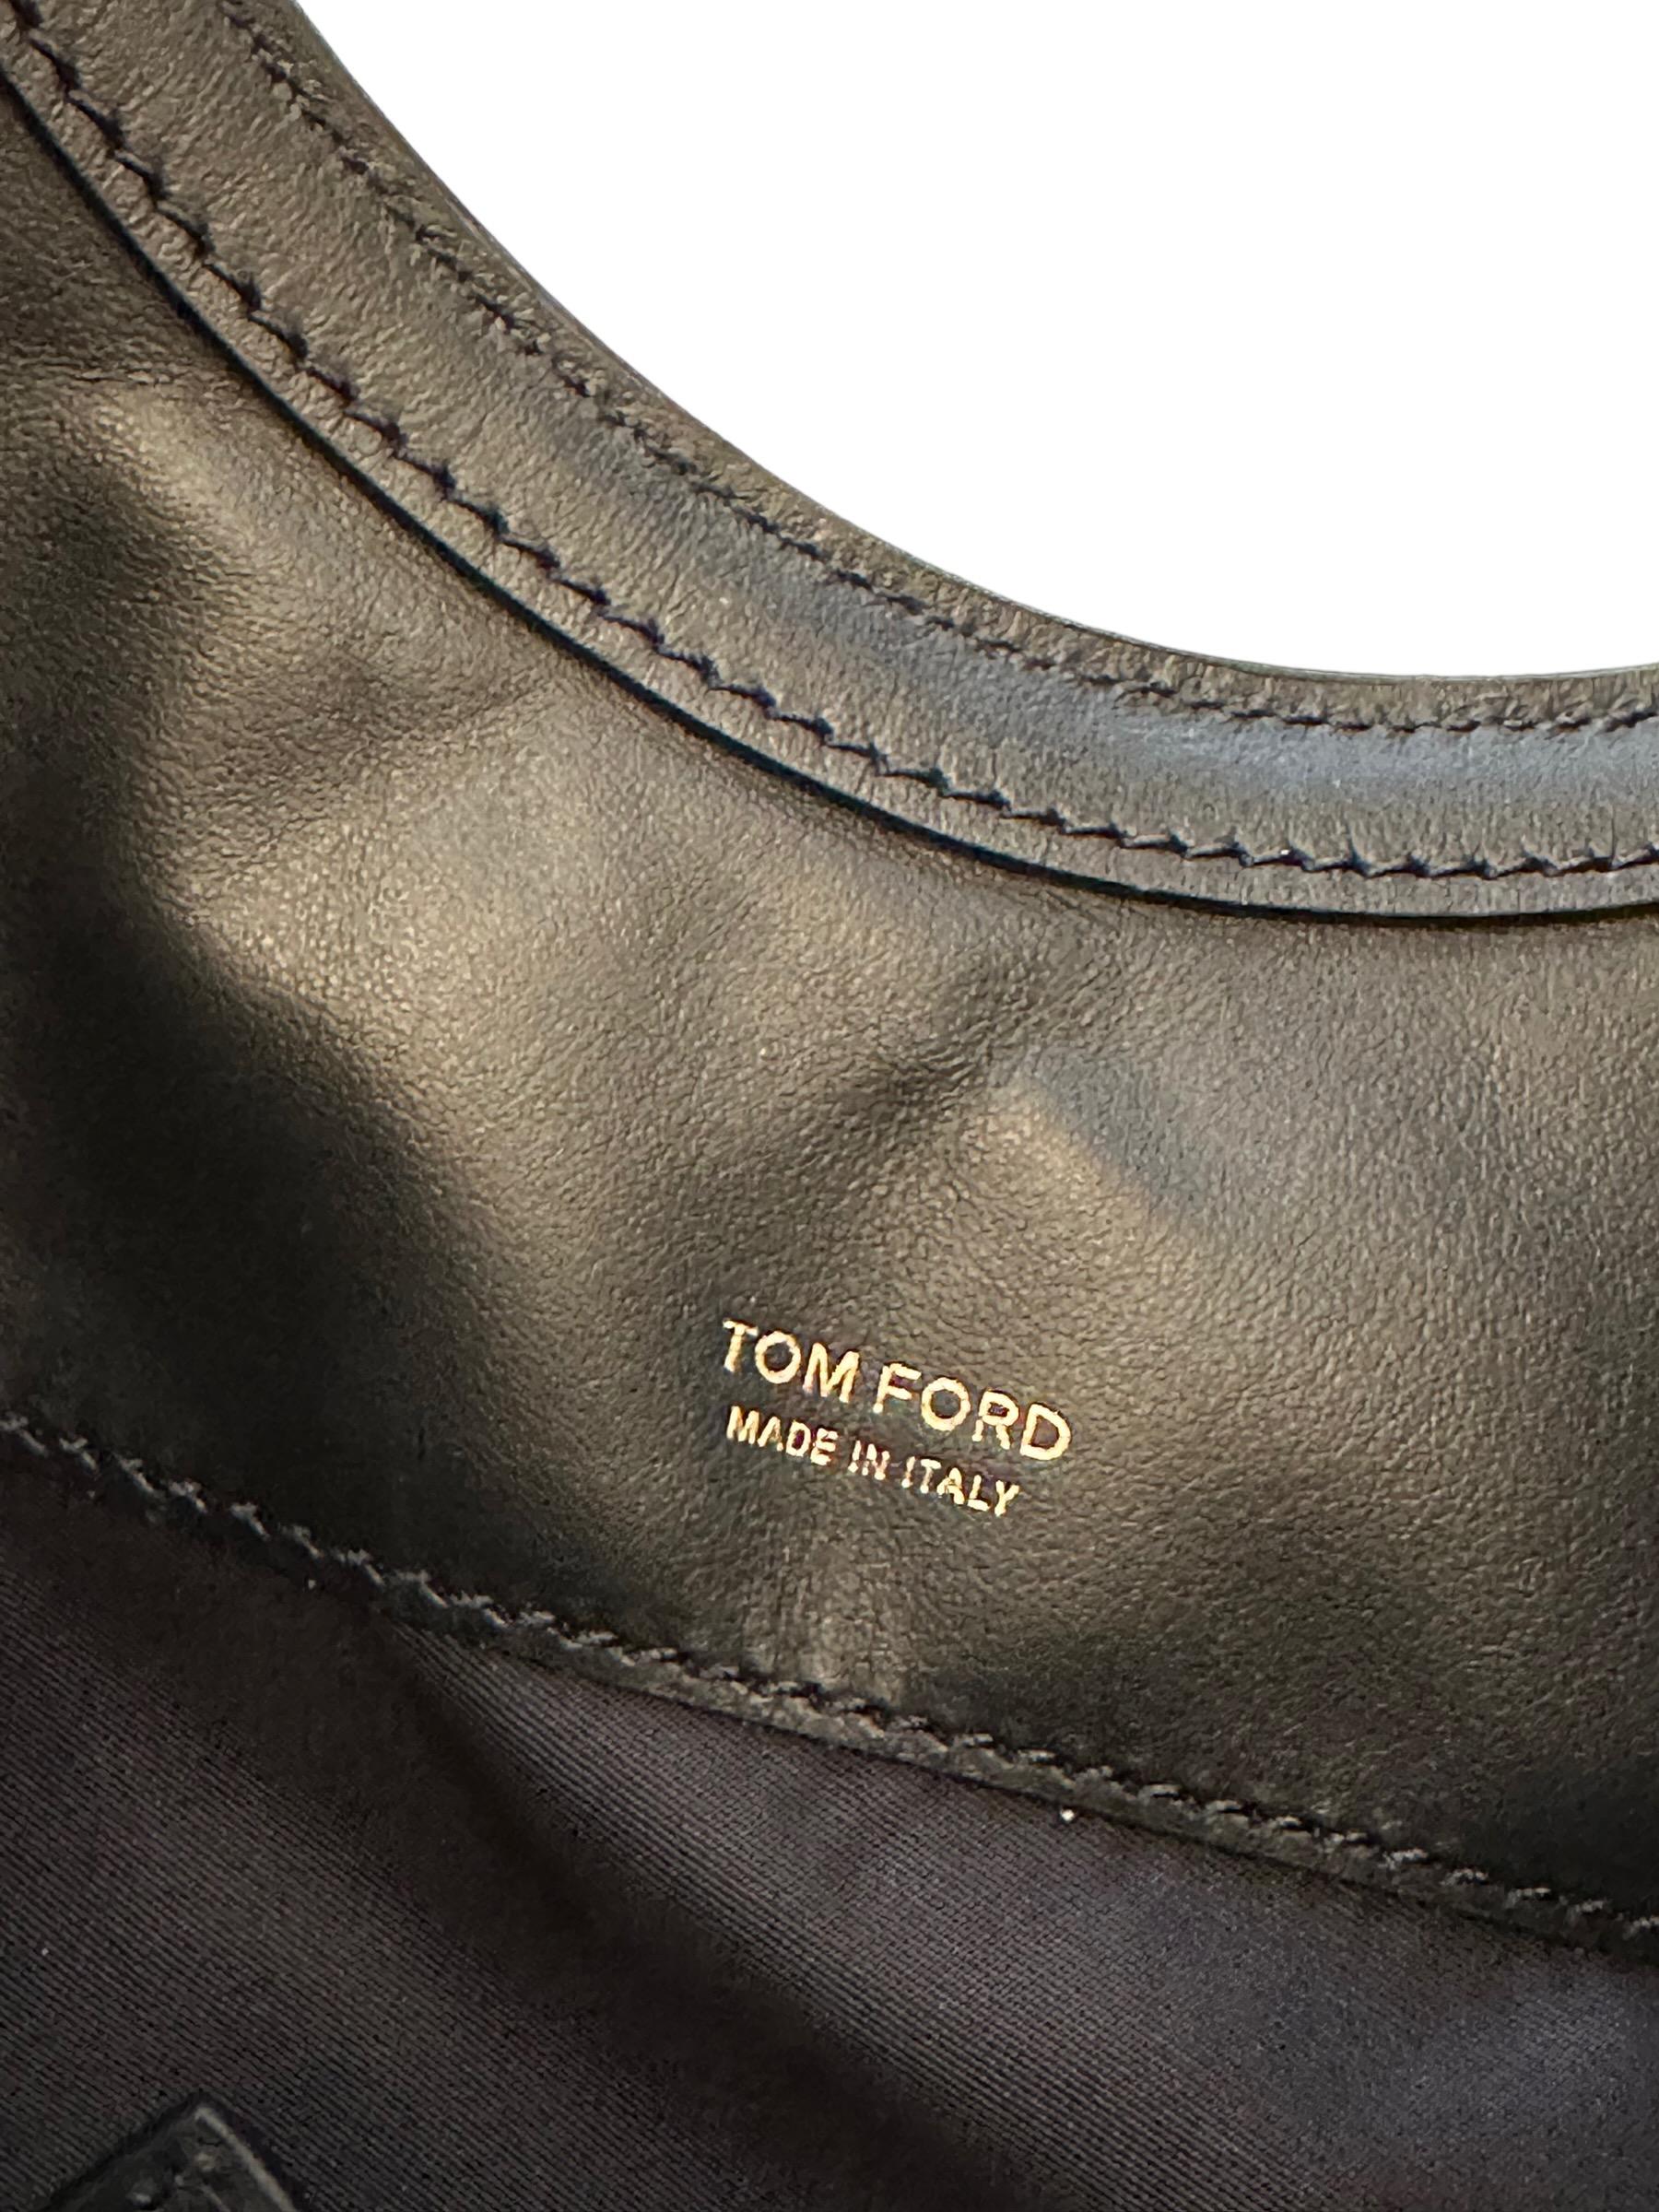 Tom Ford Black Quilted Nylon Puffy Alix Bag For Sale 3